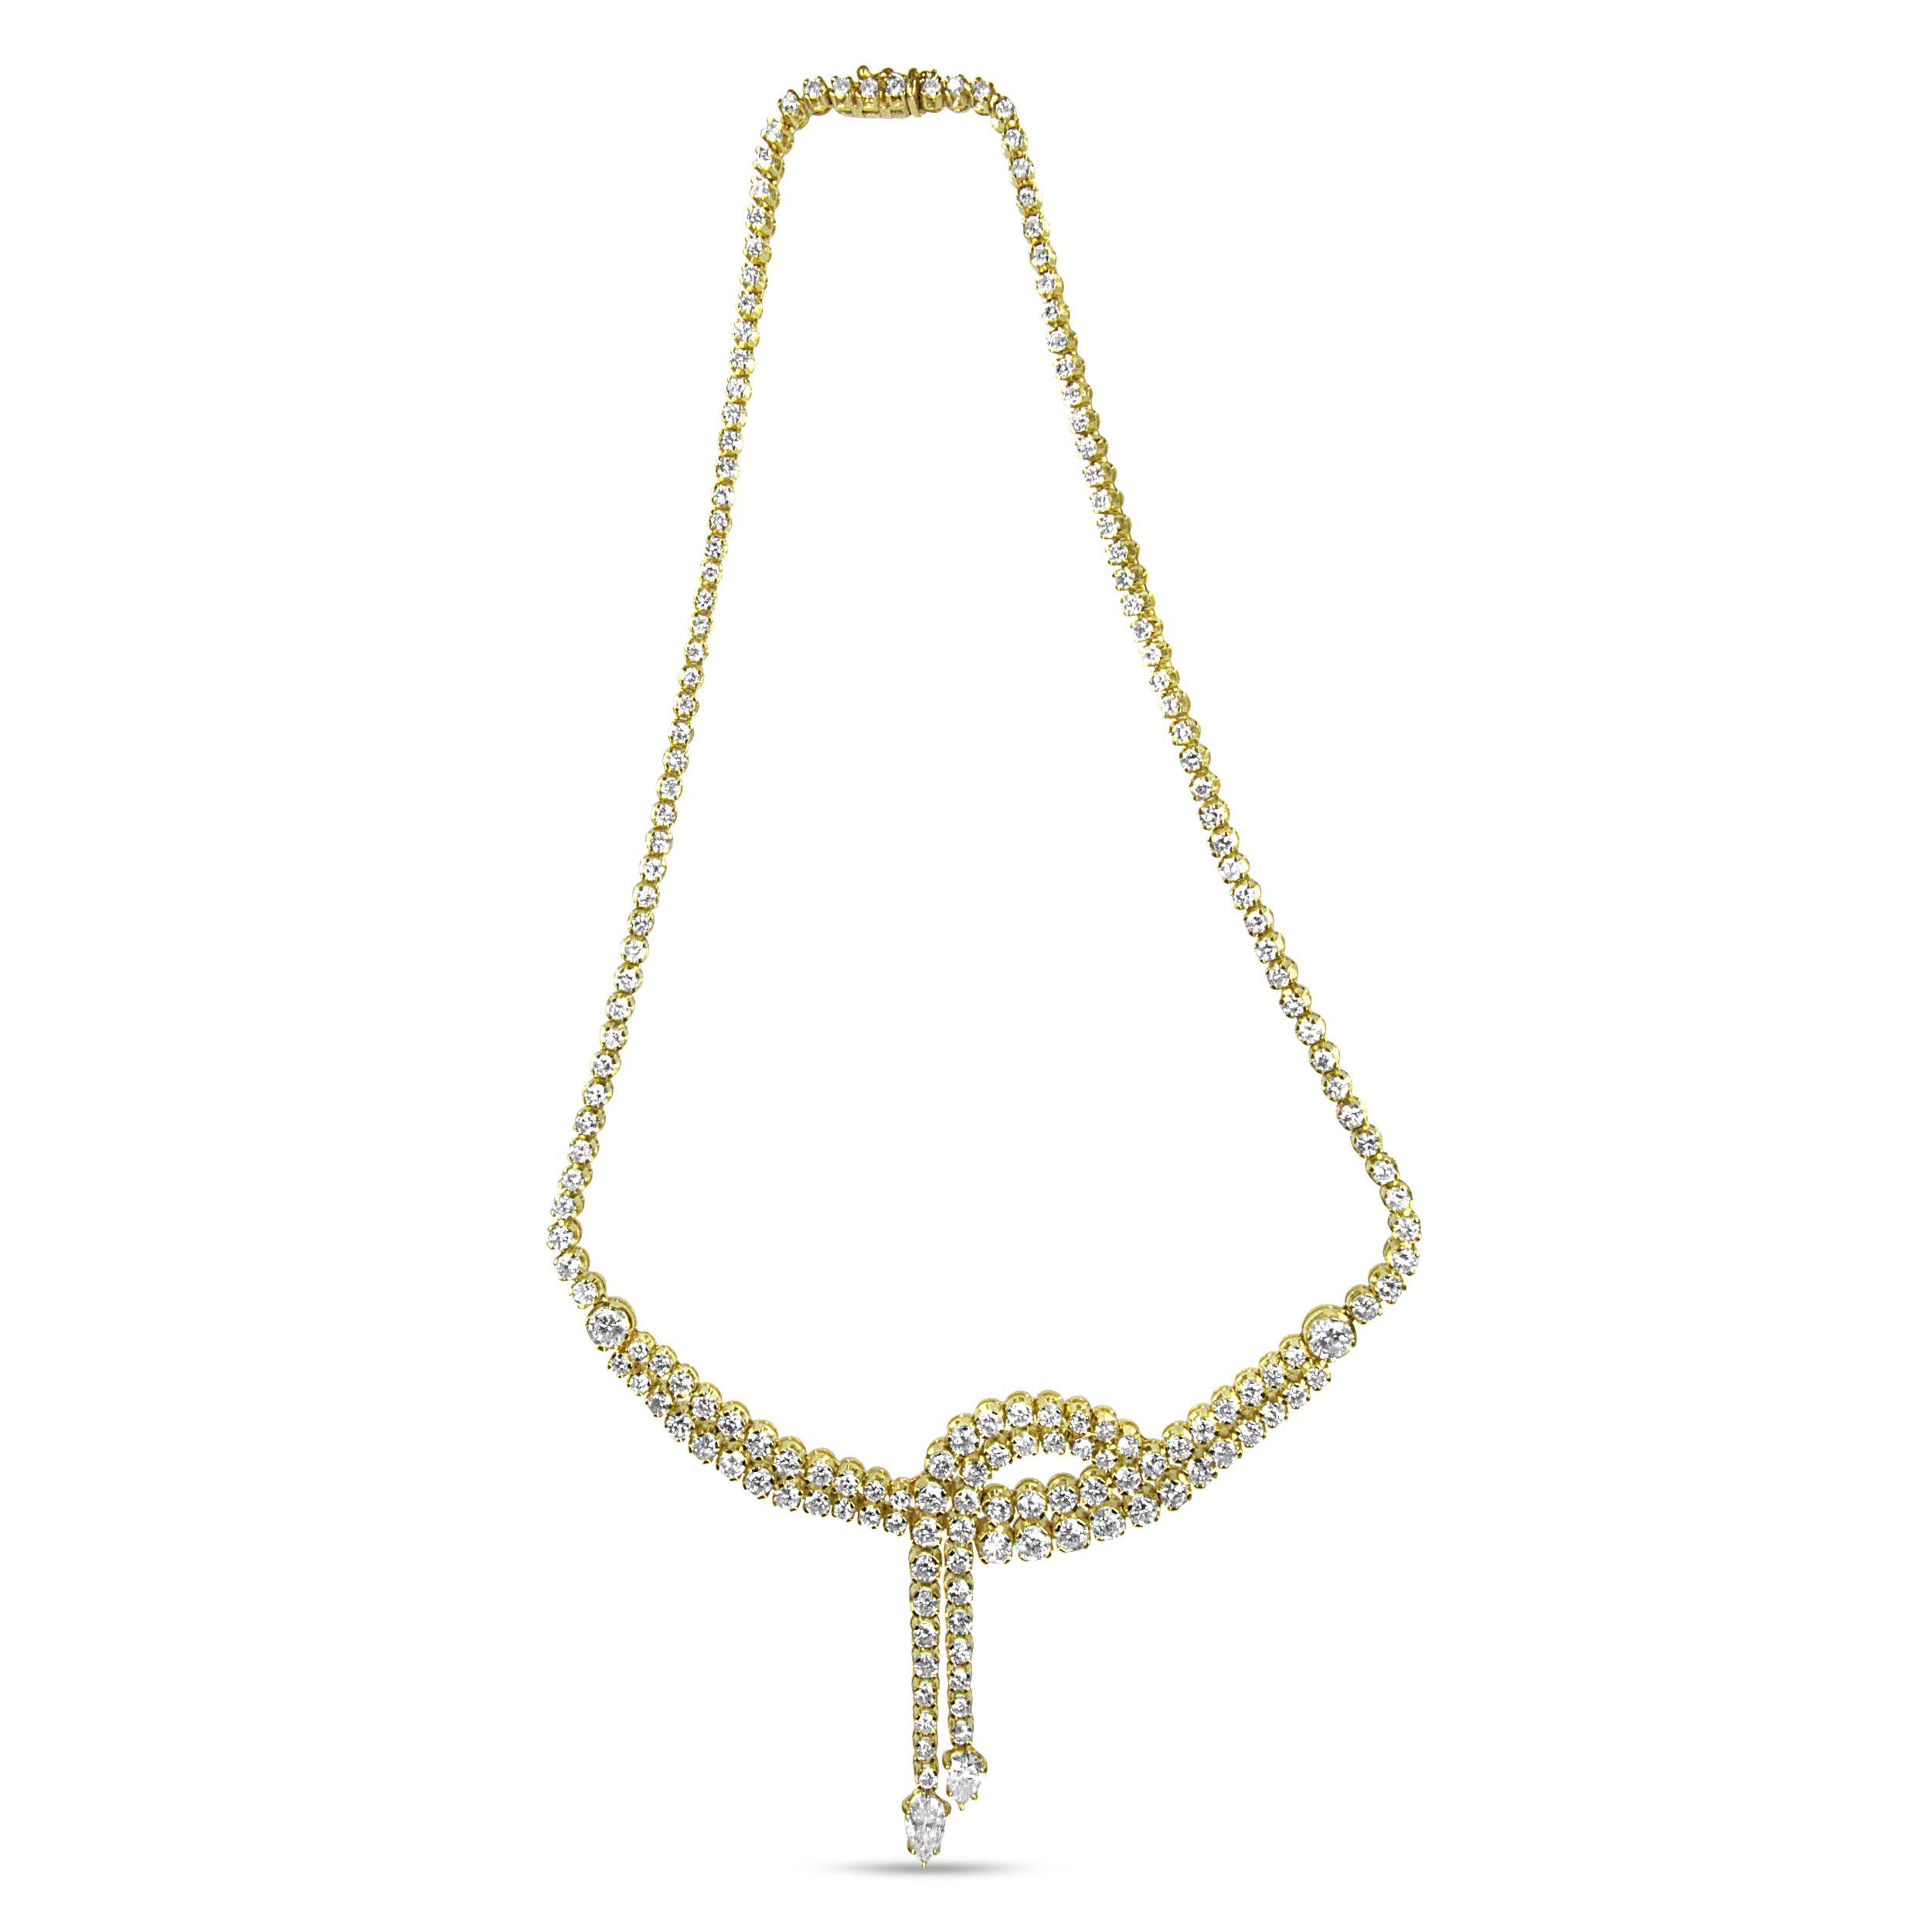 Round Cut 14K Yellow Gold 17.0 Carat Diamond Double Row Lariat Tennis Necklace For Sale